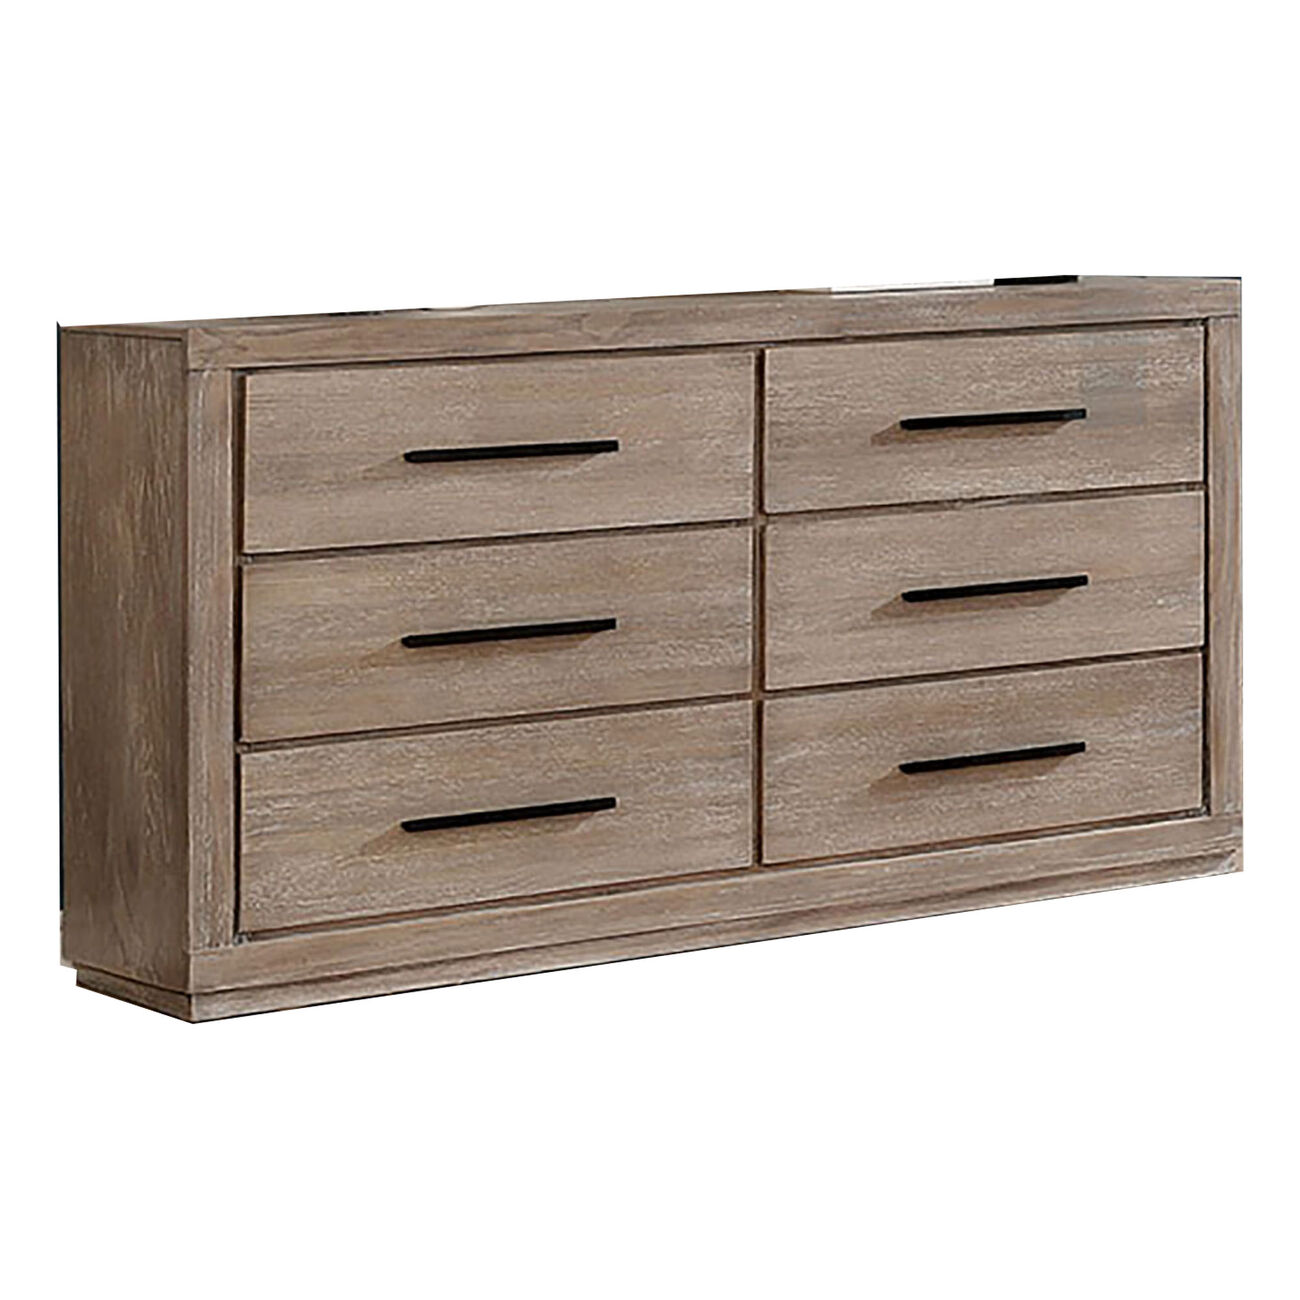 6 Drawer Transitional Style Wooden Dresser with Bar Handles, Brown